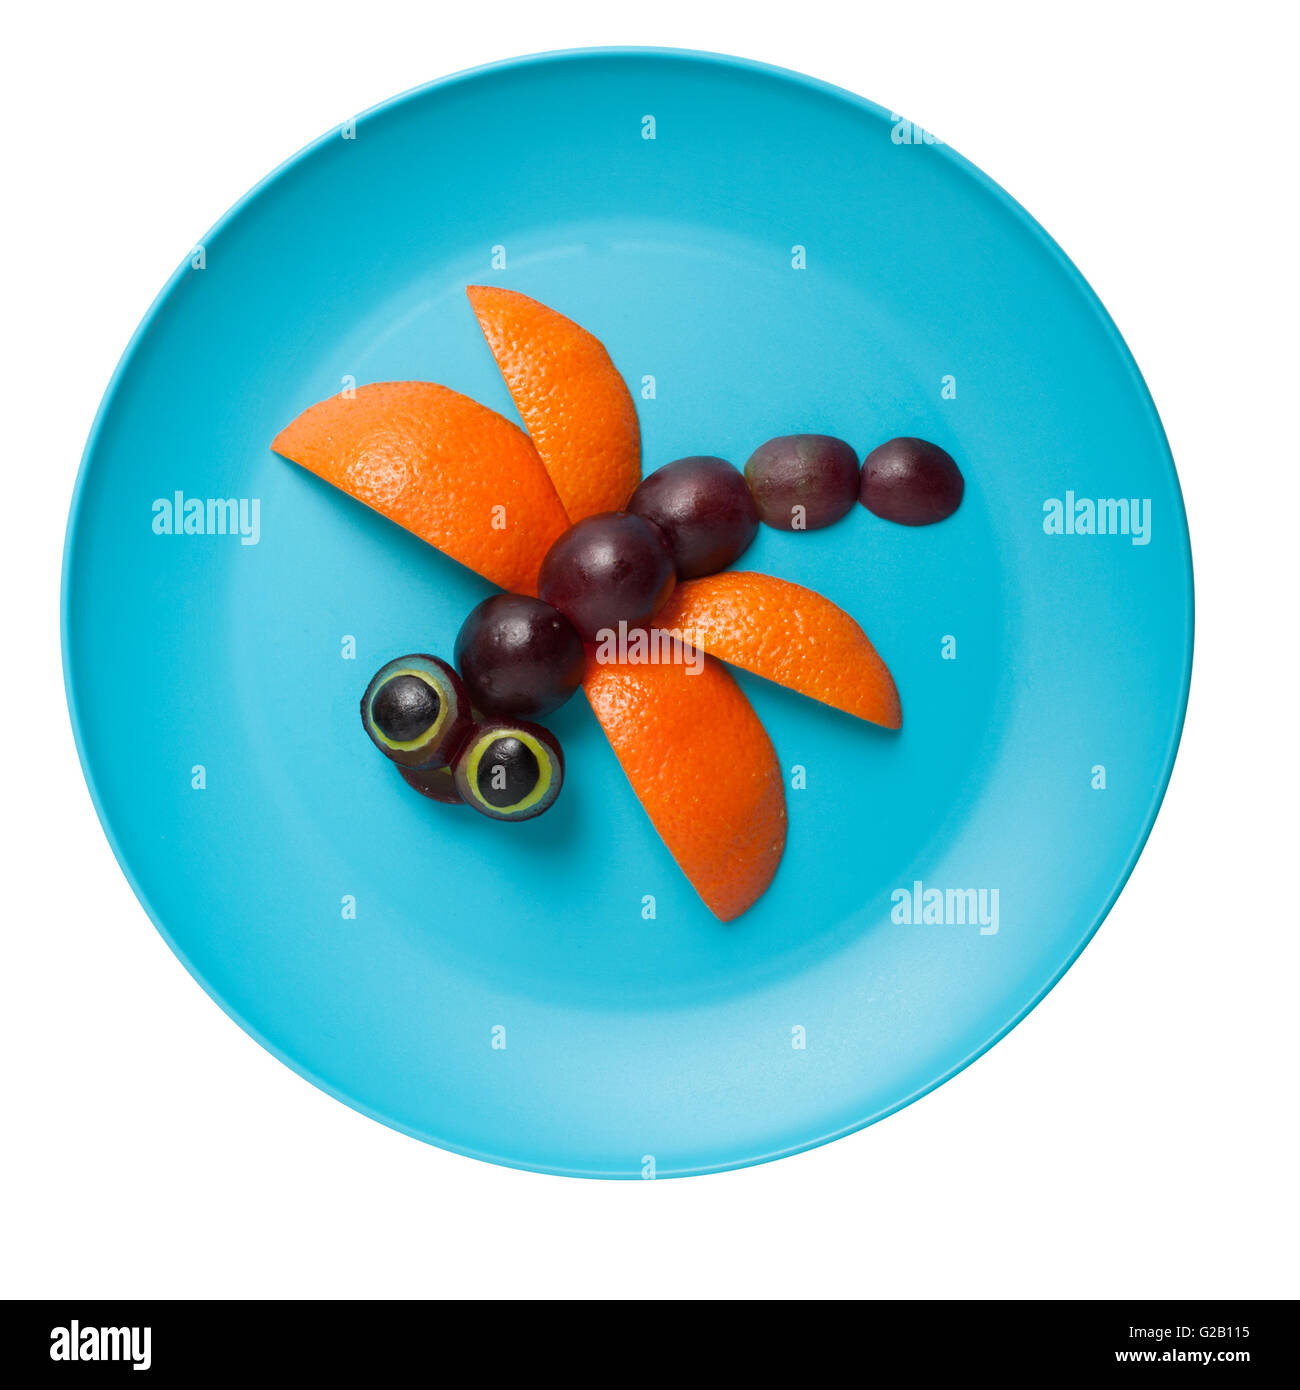 Dragonfly made of orange and grape on plate Stock Photo